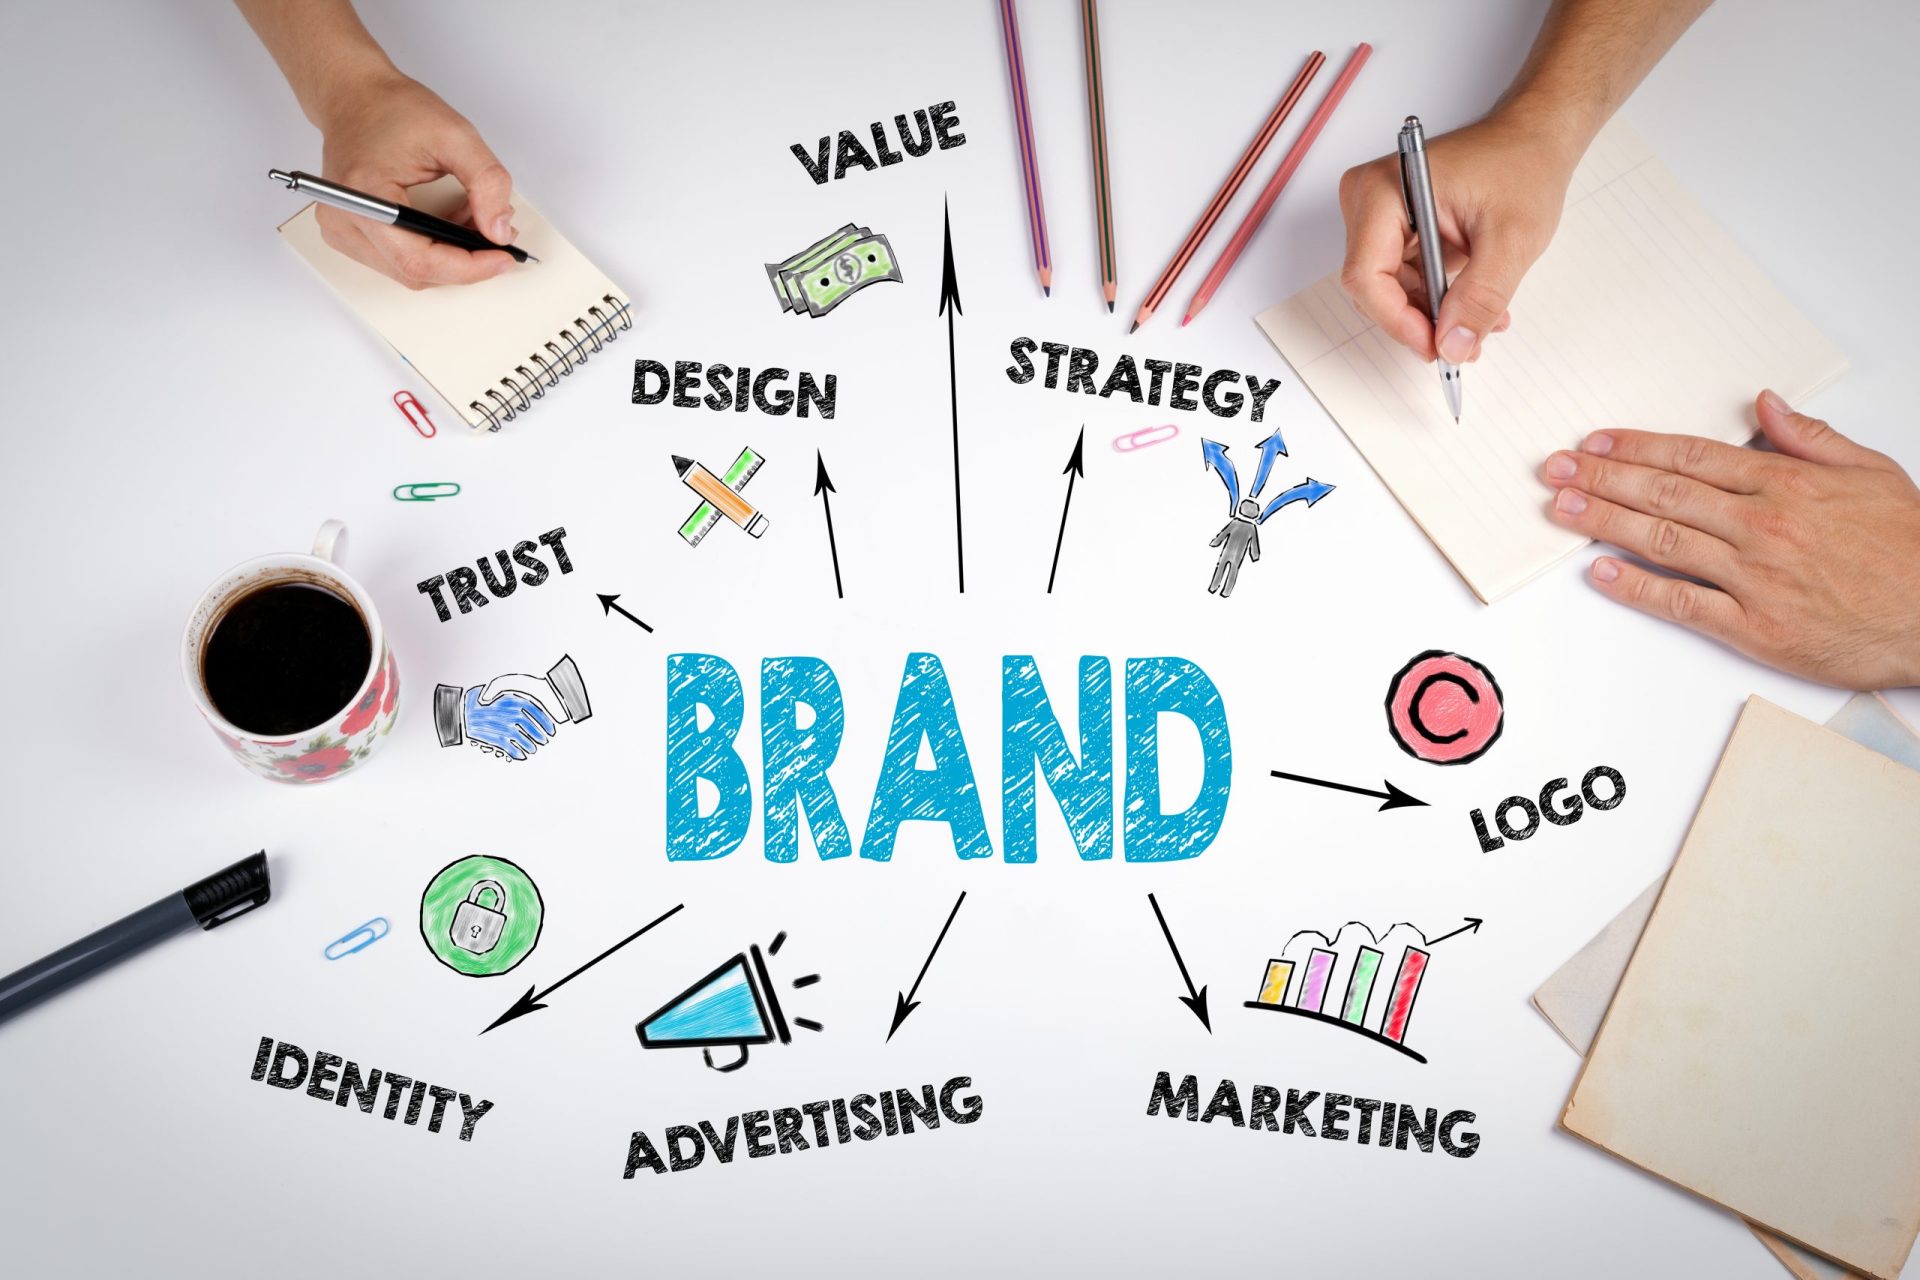 The different ramifications of a brand identity, including the brand’s strategy; value; design of all aspects such as logos, advertising and marketing; as well as the trust built with customers.